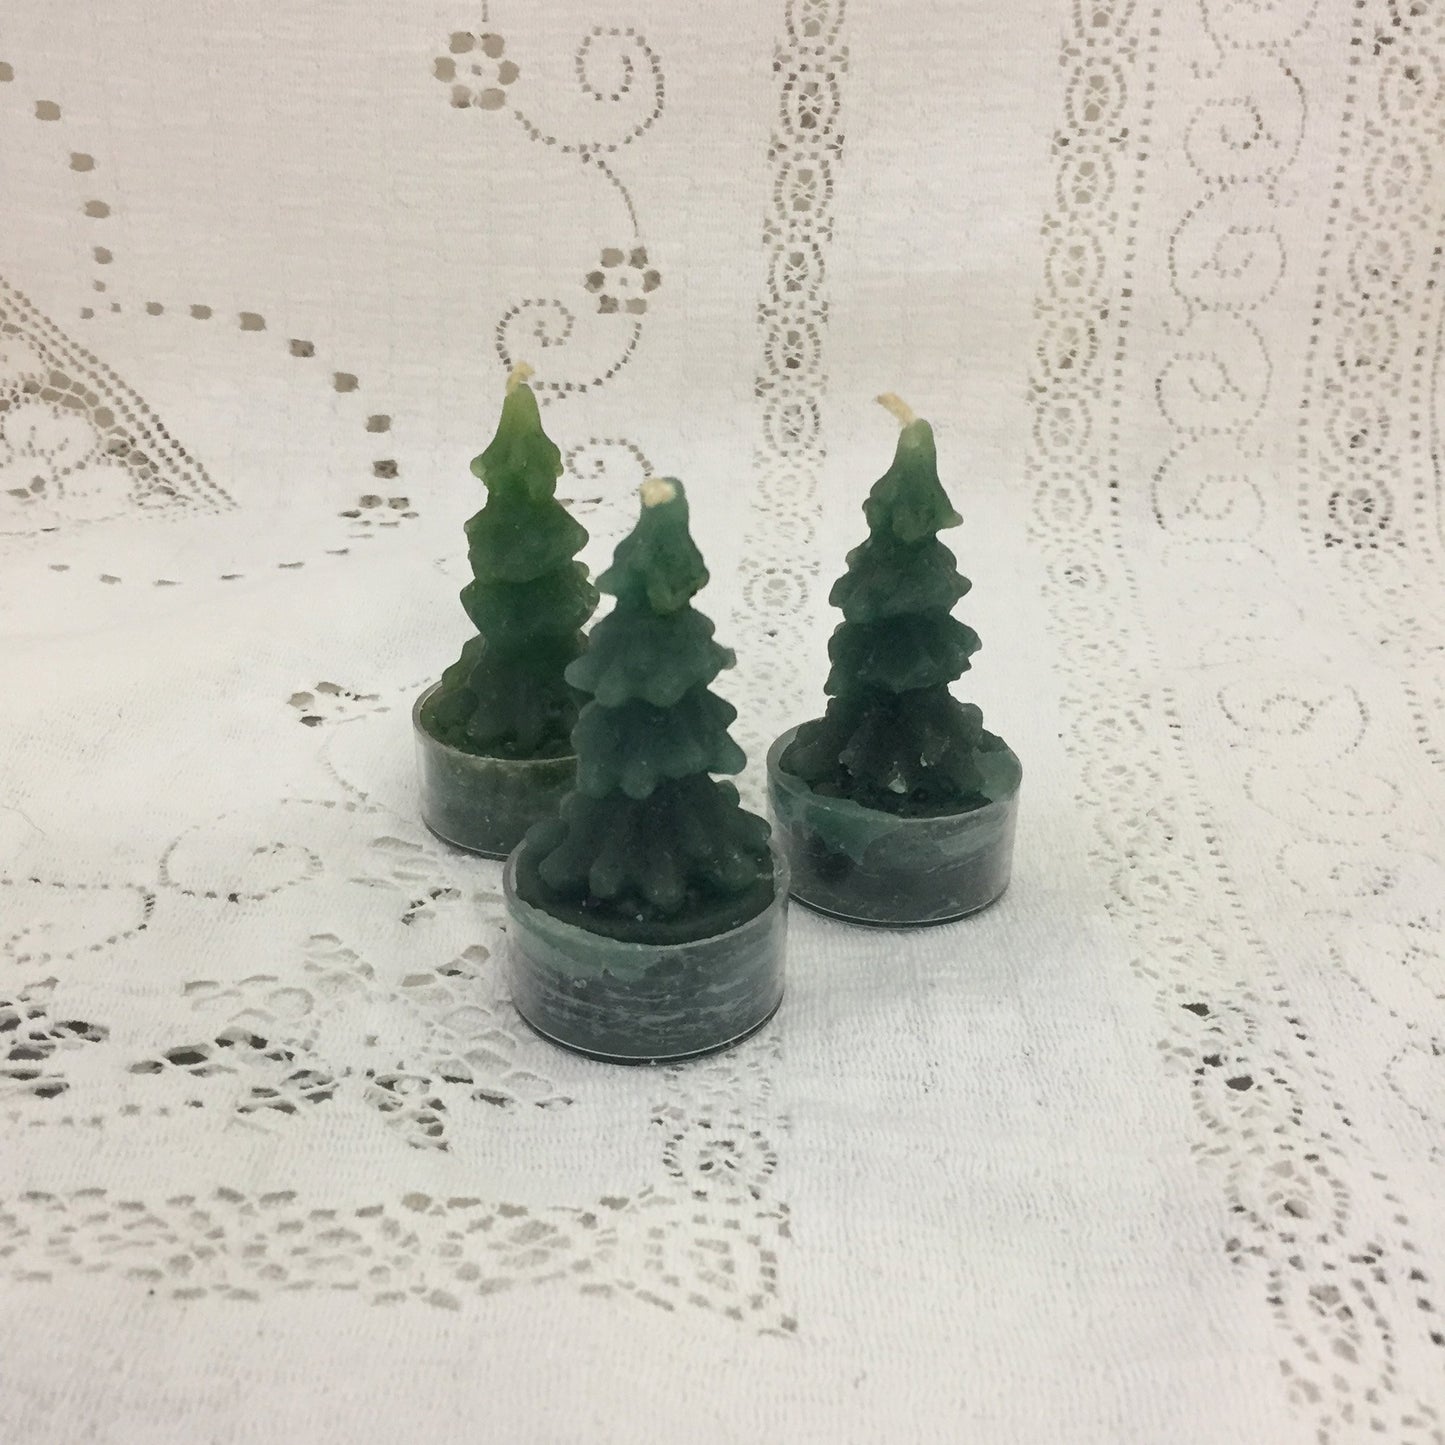 Evergreen Tree candles, 4"D x 9 1/2"H, or small trees 3 pkg., 4 solid colours - Fanny Bay Candle Company